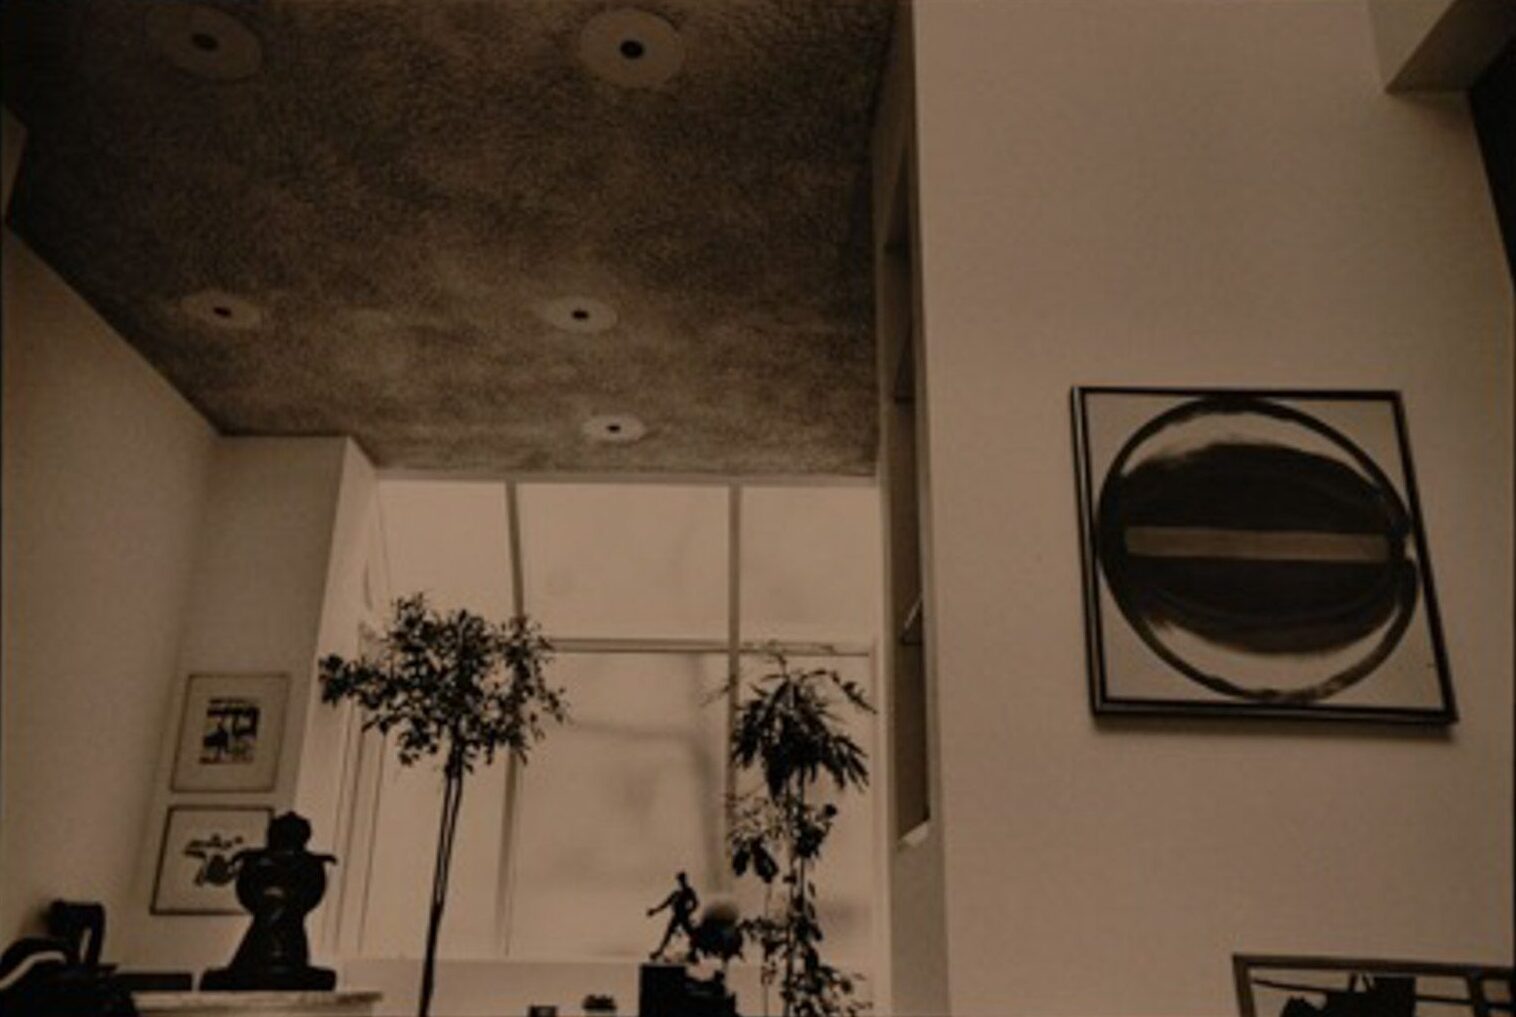 A black and white image of a home interior